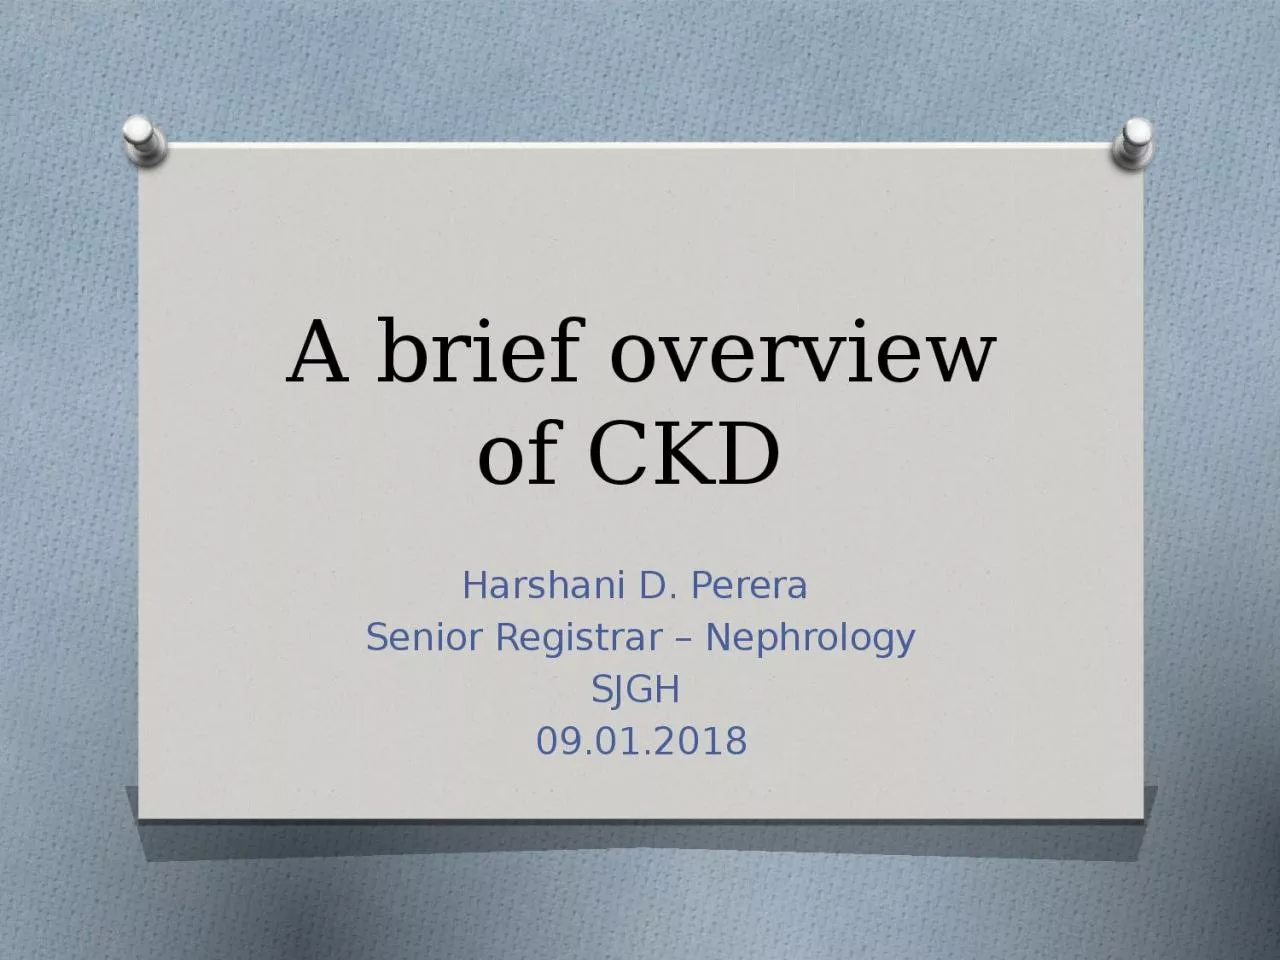 A brief overview of CKD